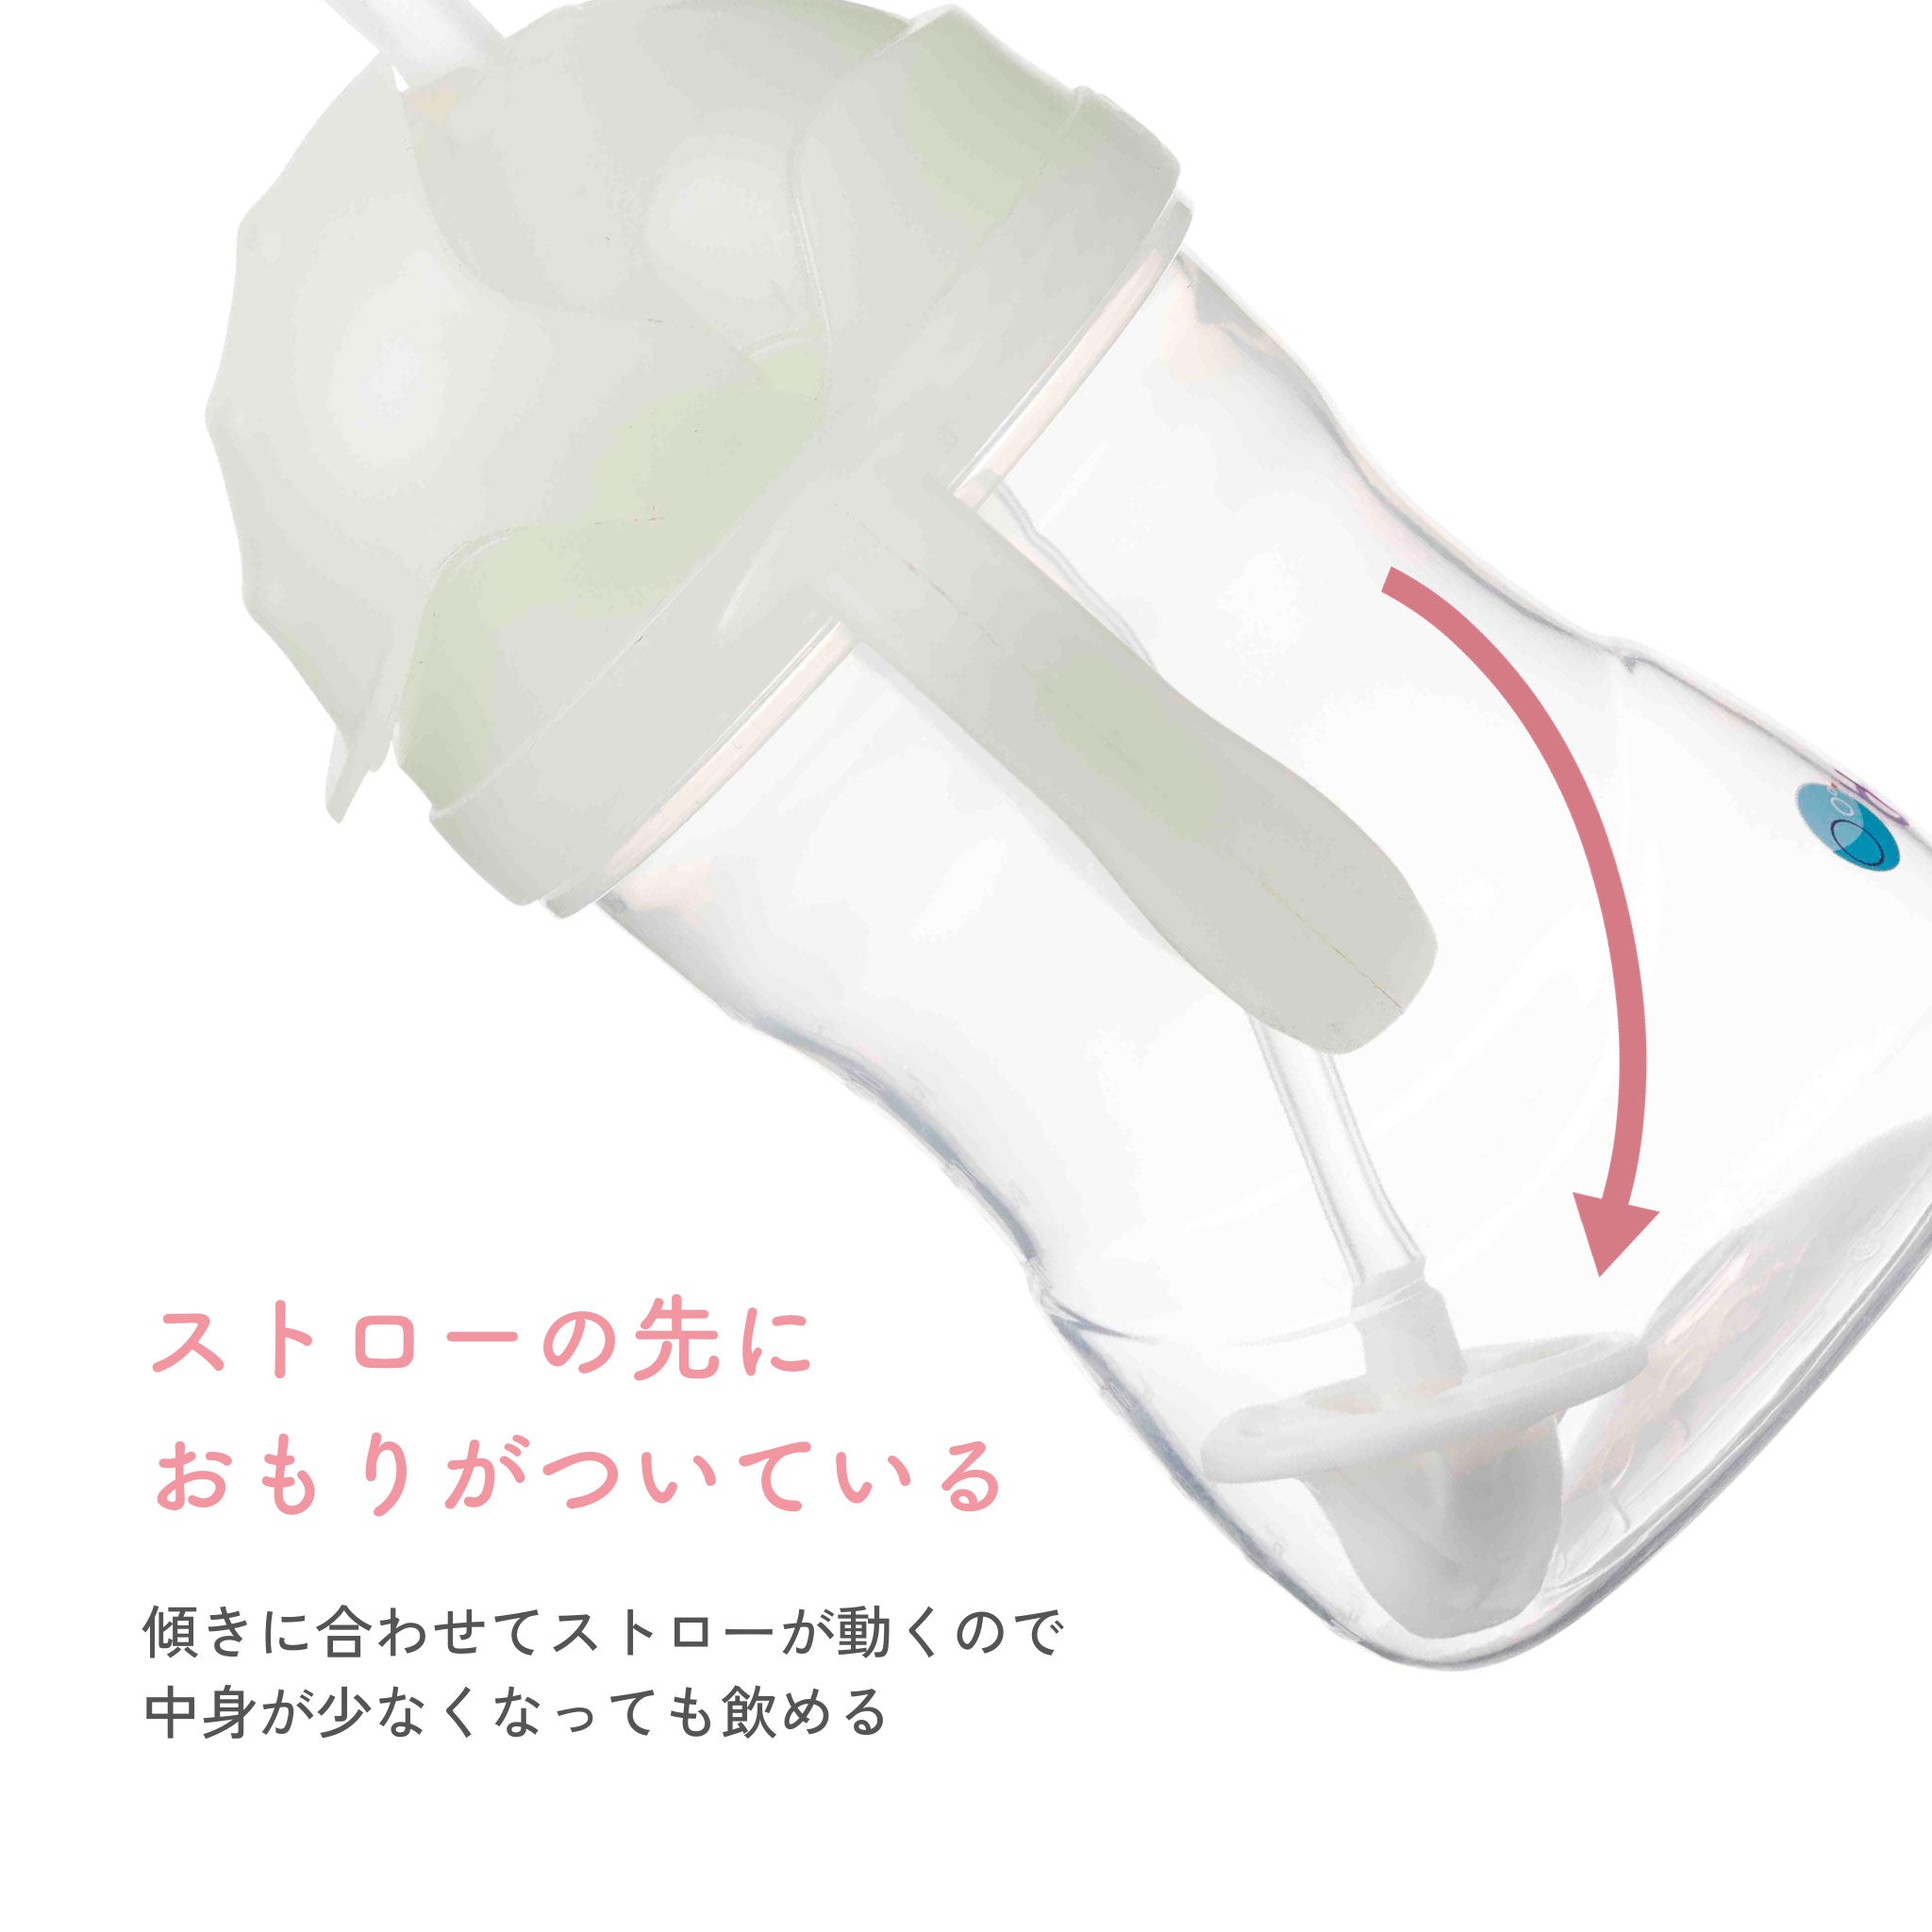 *b.box* Sippy cup ストローマグ シッピーカップ  - glow in the dark